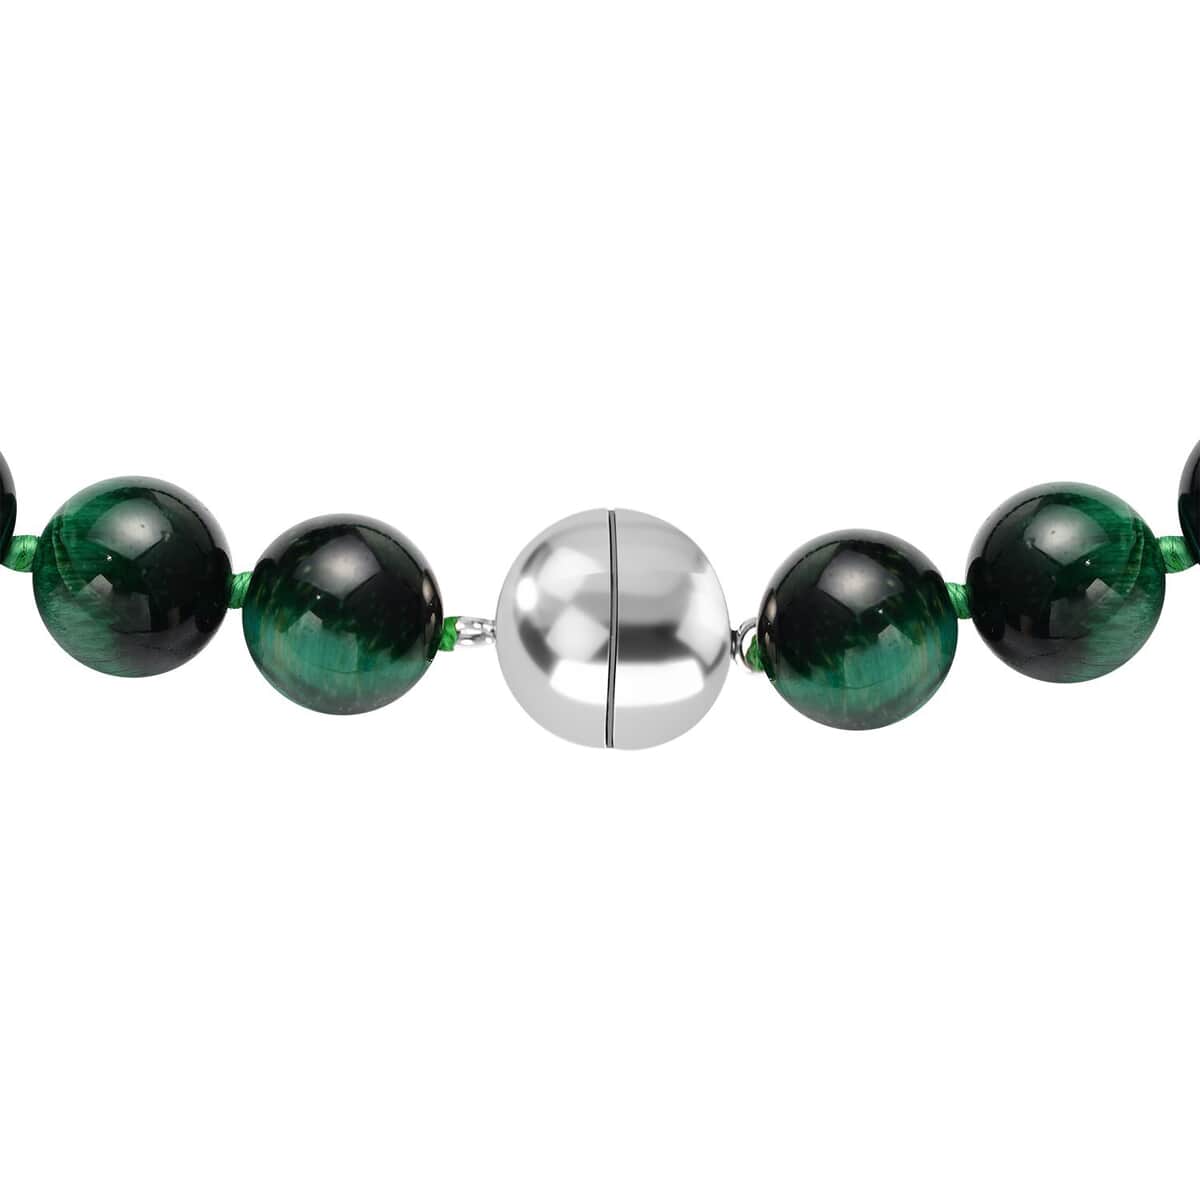 Premium Green Tiger's Eye Necklace in Rhodium Over Sterling Silver, Beaded Necklace, Bead Jewelry, Birthday Gifts 607.50 ctw (20 Inches) image number 3